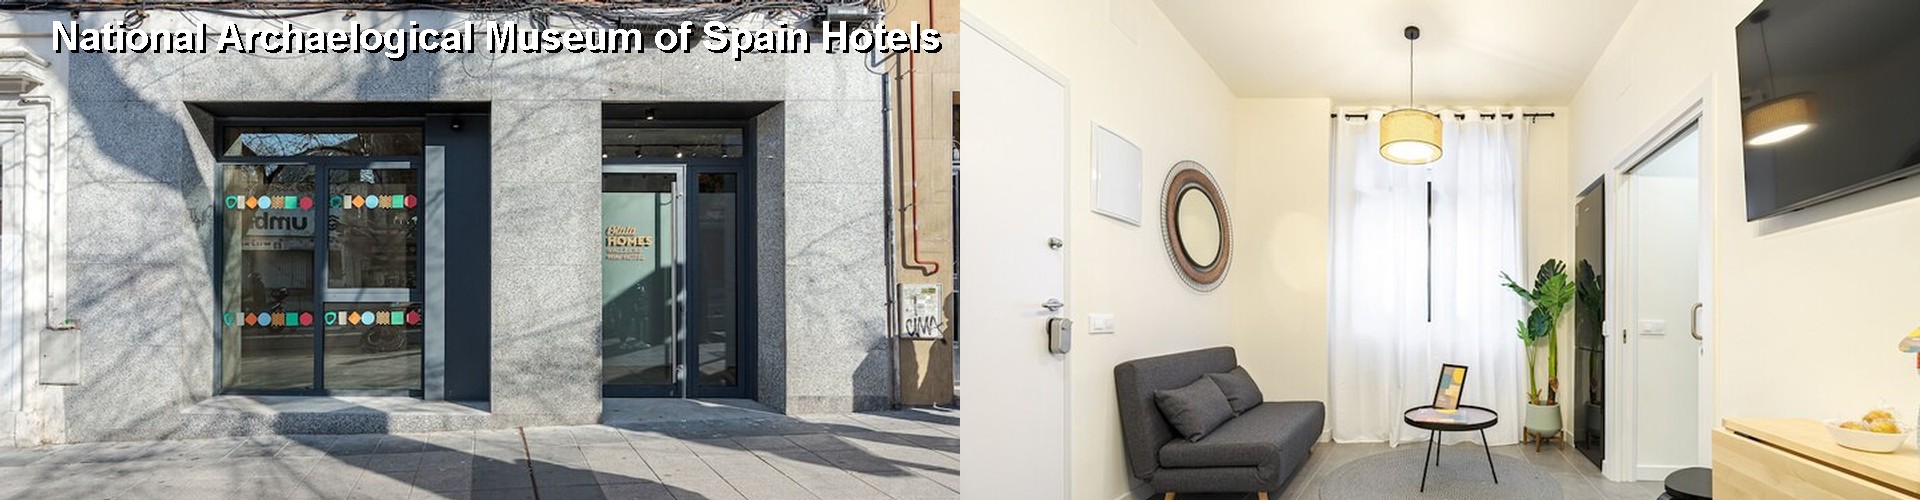 5 Best Hotels near National Archaelogical Museum of Spain